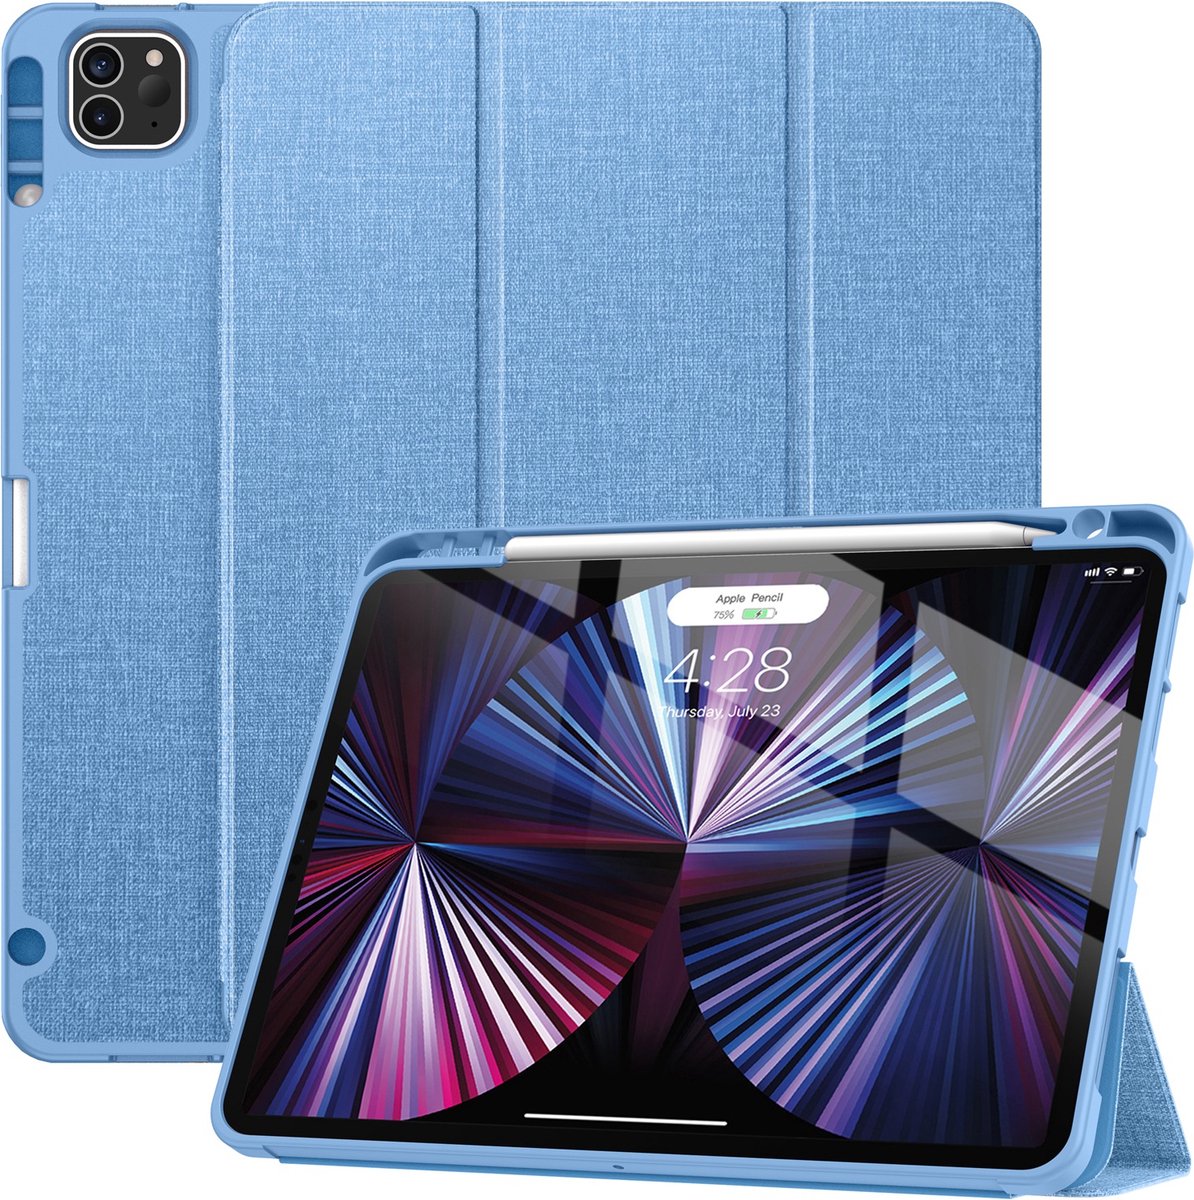 Solidenz TriFold Hoes iPad Air 5 / Air 4 / iPad Pro 11 inch - Blauw